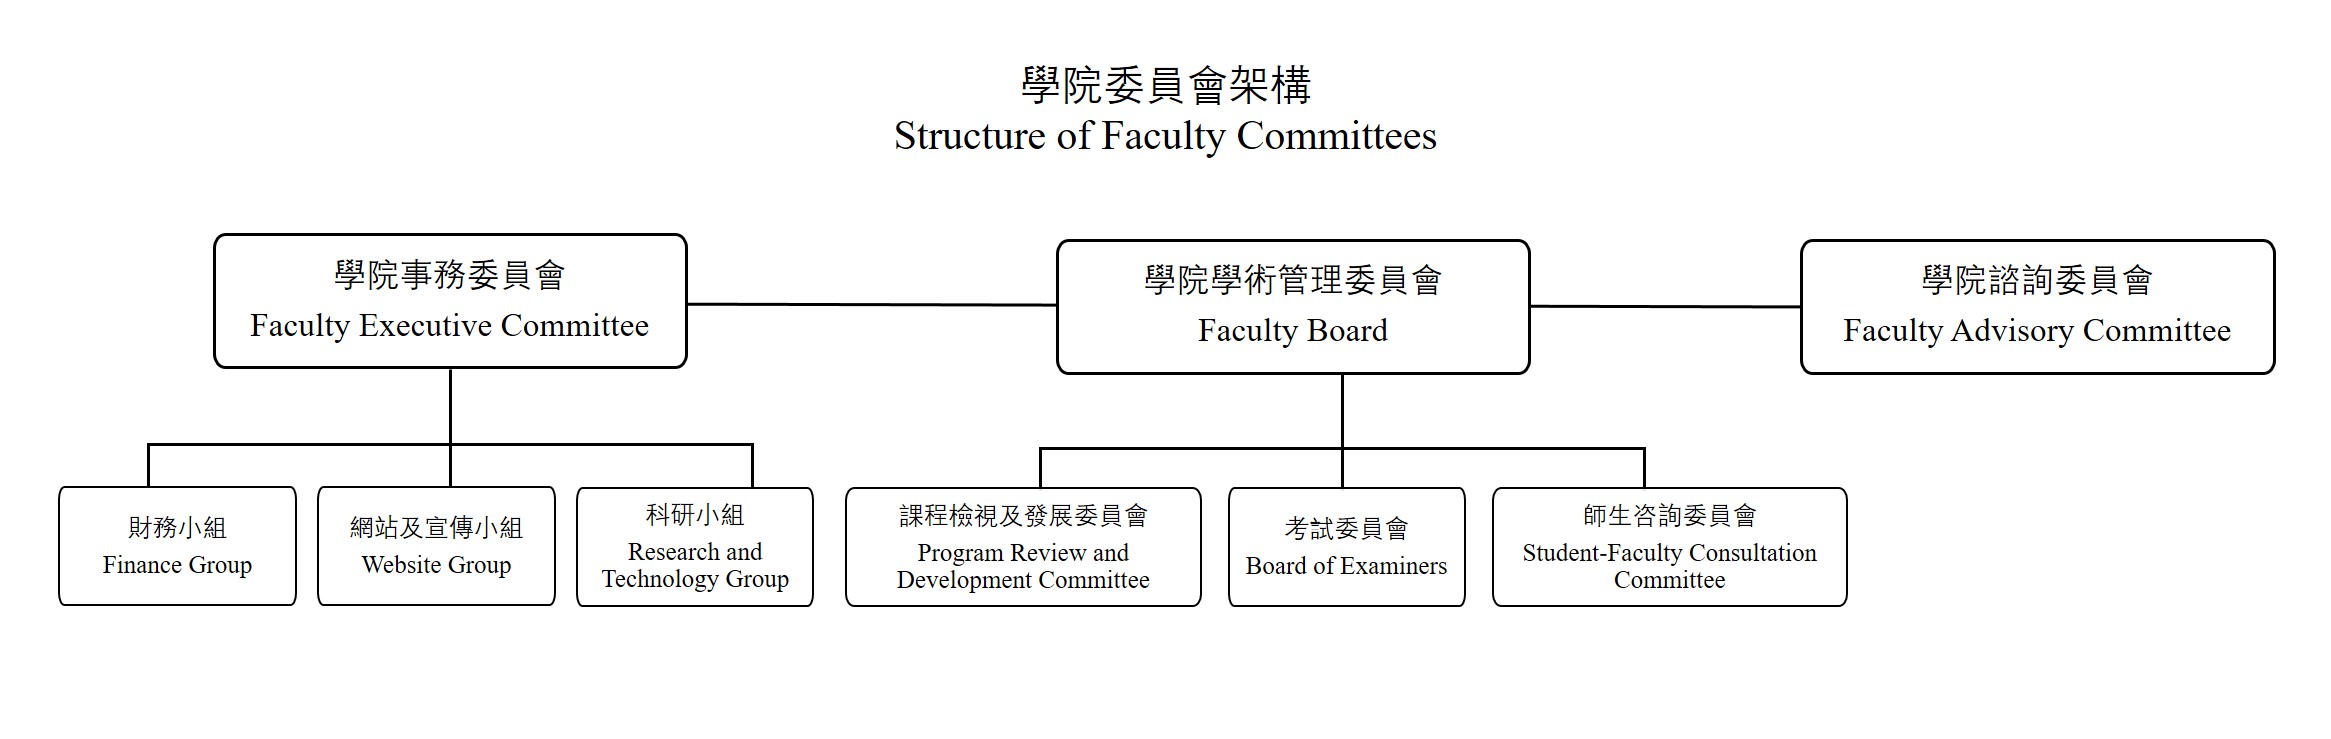 Structure of Faculty Committees